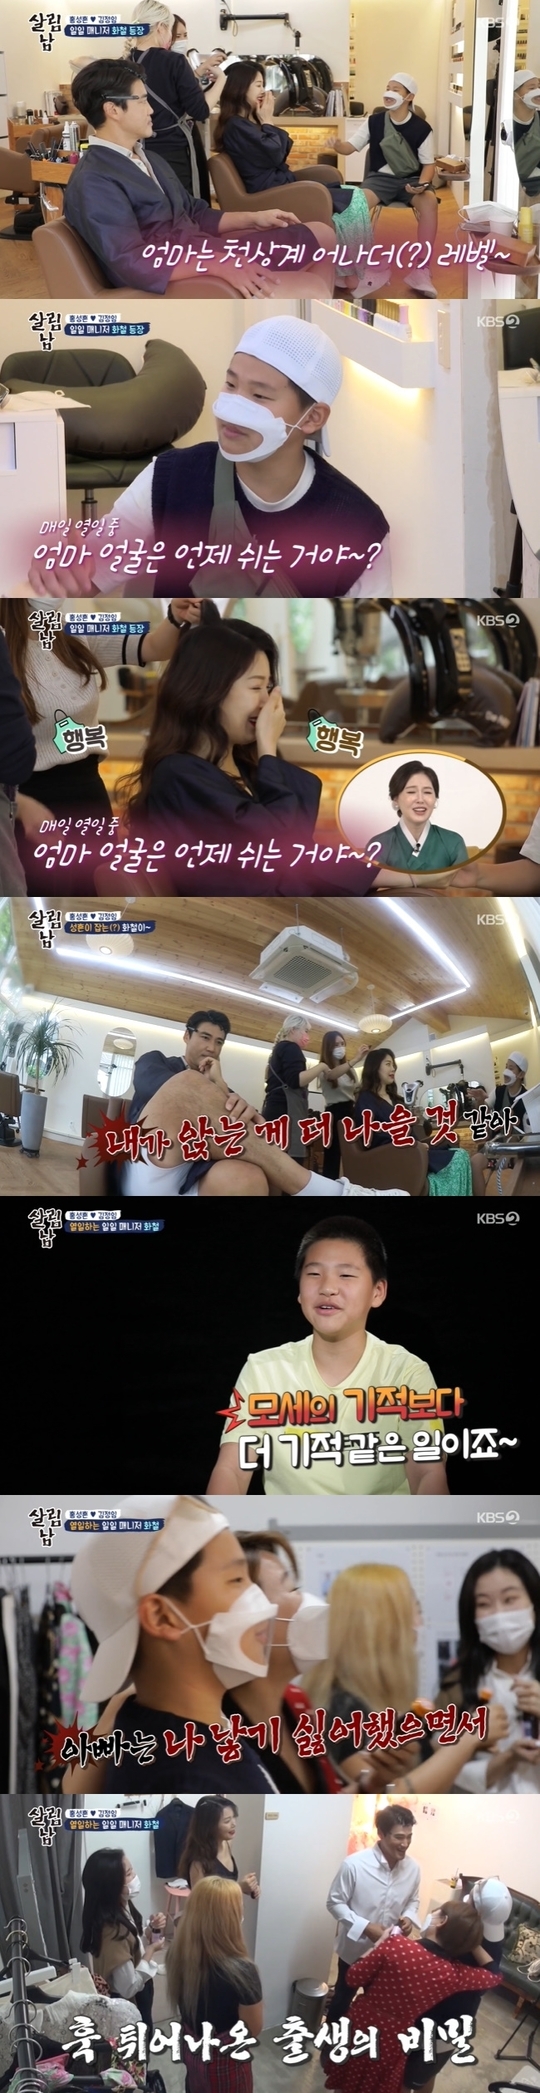 Hong Sung-heon, Kim Jung Ims son Hong Hwa-cheol captured people with his full lovely for his mother.On KBS 2TVs Season 2 of Living Men, which was broadcast on September 18, Hong Sung-heon and Kim Jung Im challenged the couple to shoot a picture.Why do you exercise at night? (Mom) is already Gods body, said Hong Hwa-cheol, who saw her mother working out at home ahead of the photo shoot.Hong Hwa-cheol was accompanied by his parents as a manager at the photo shoot. When he approached his mother who was getting hair and makeup, he said, My mother is the upper level of heavenly world.If you are so beautiful all the time, said Lovely. Hae Hee was surprised that she could not talk about her daughter, and Choi Soo-jong was also immersed in the charm of Honghwacheol.On the other hand, when asked about How am I today? by his father Hong Sung-heon, Hong Hwa-cheol responded in contradiction that I feel like a common neighborhood uncle.He asked the staff to take a picture and presented the drinks with a message written to the staff. I heard a pencil a year or so, he said.I gave it to the staff, hoping that you would take her more beautifully and lovingly, and it was more miraculous than Mosess miracle that I would take the pencil.